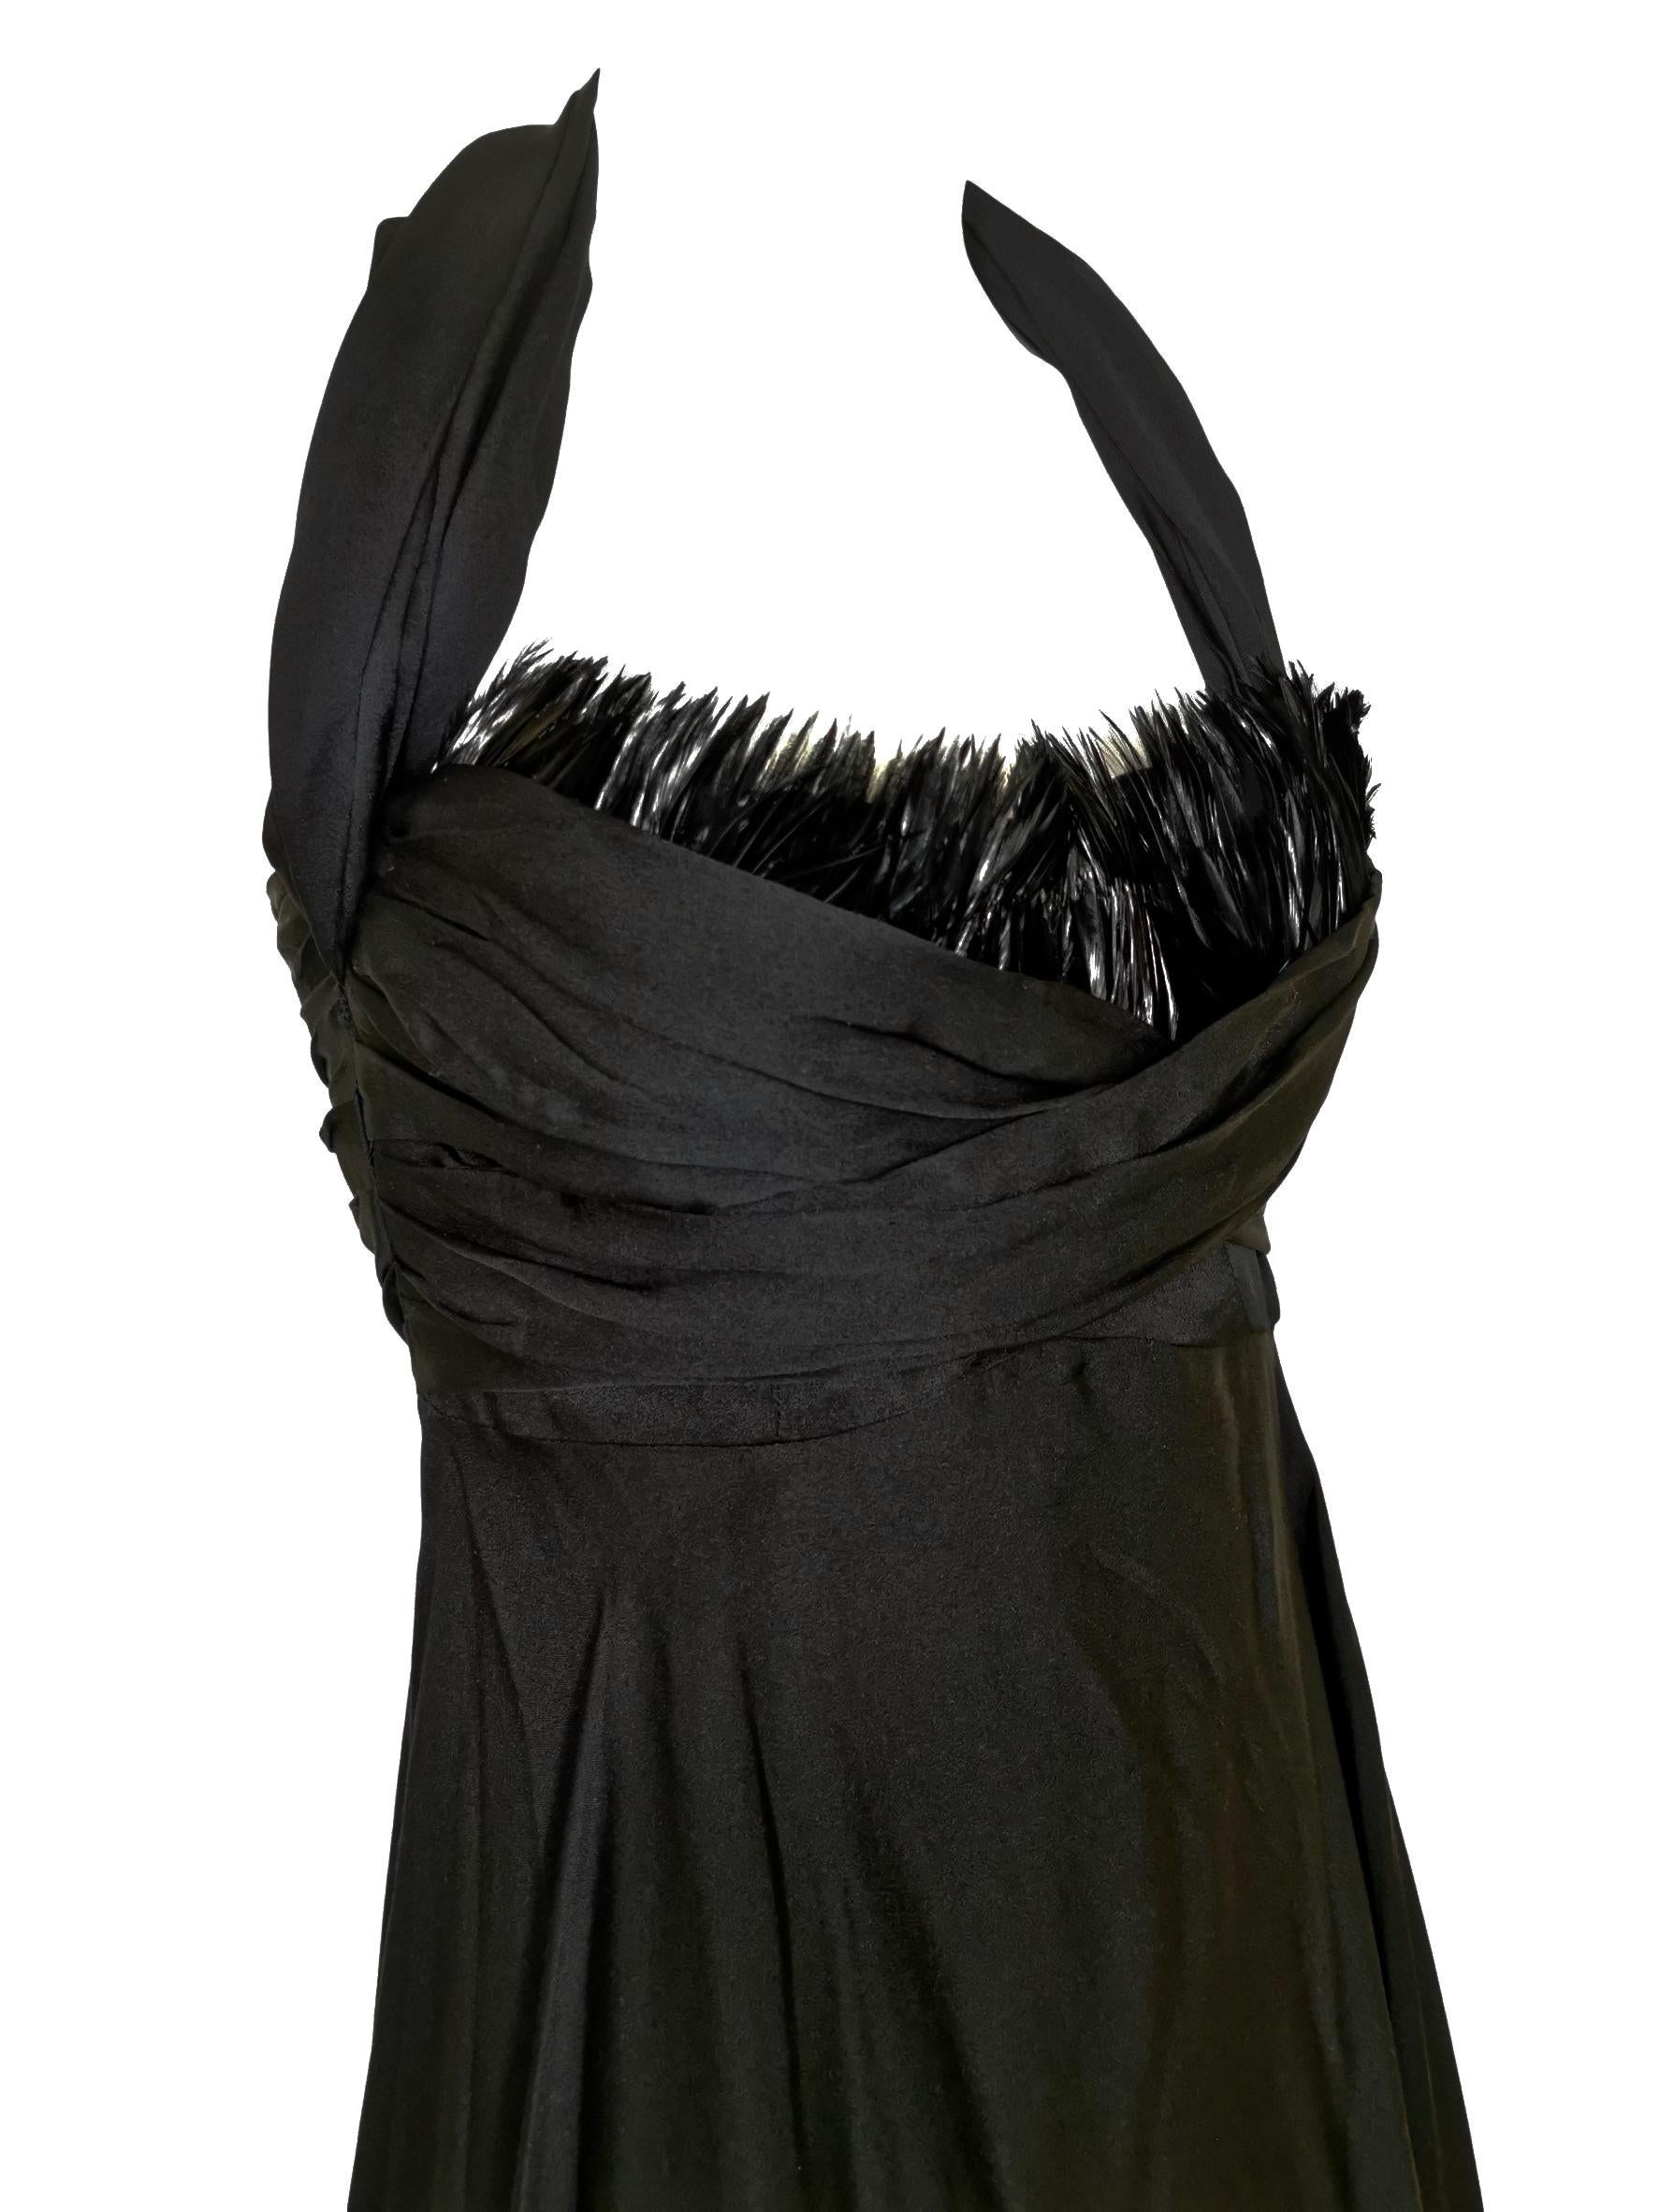 Sophie Sitbon Black Silk and Feather Dress For Sale 6